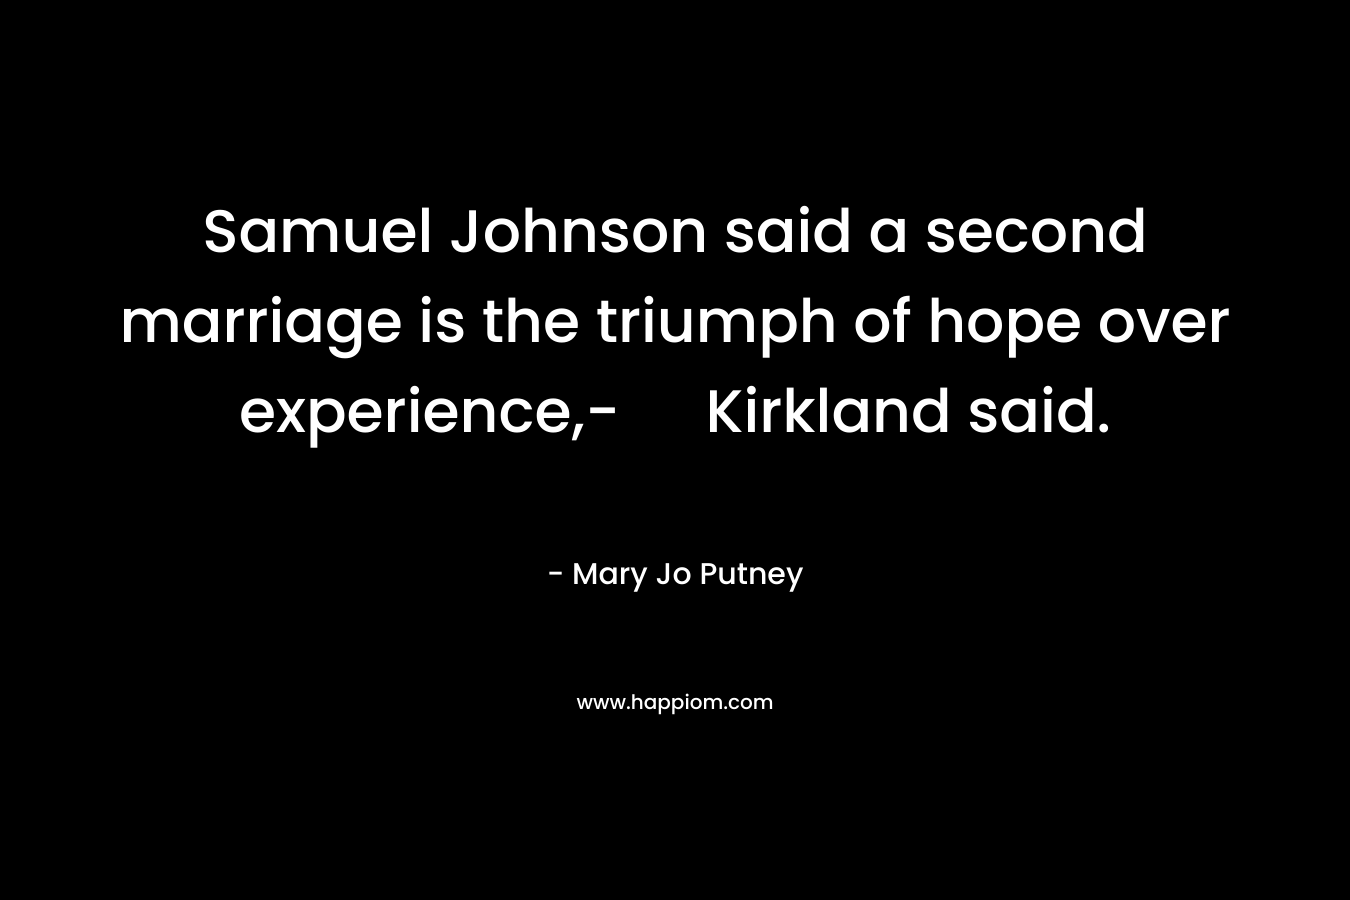 Samuel Johnson said a second marriage is the triumph of hope over experience,- Kirkland said. – Mary Jo  Putney